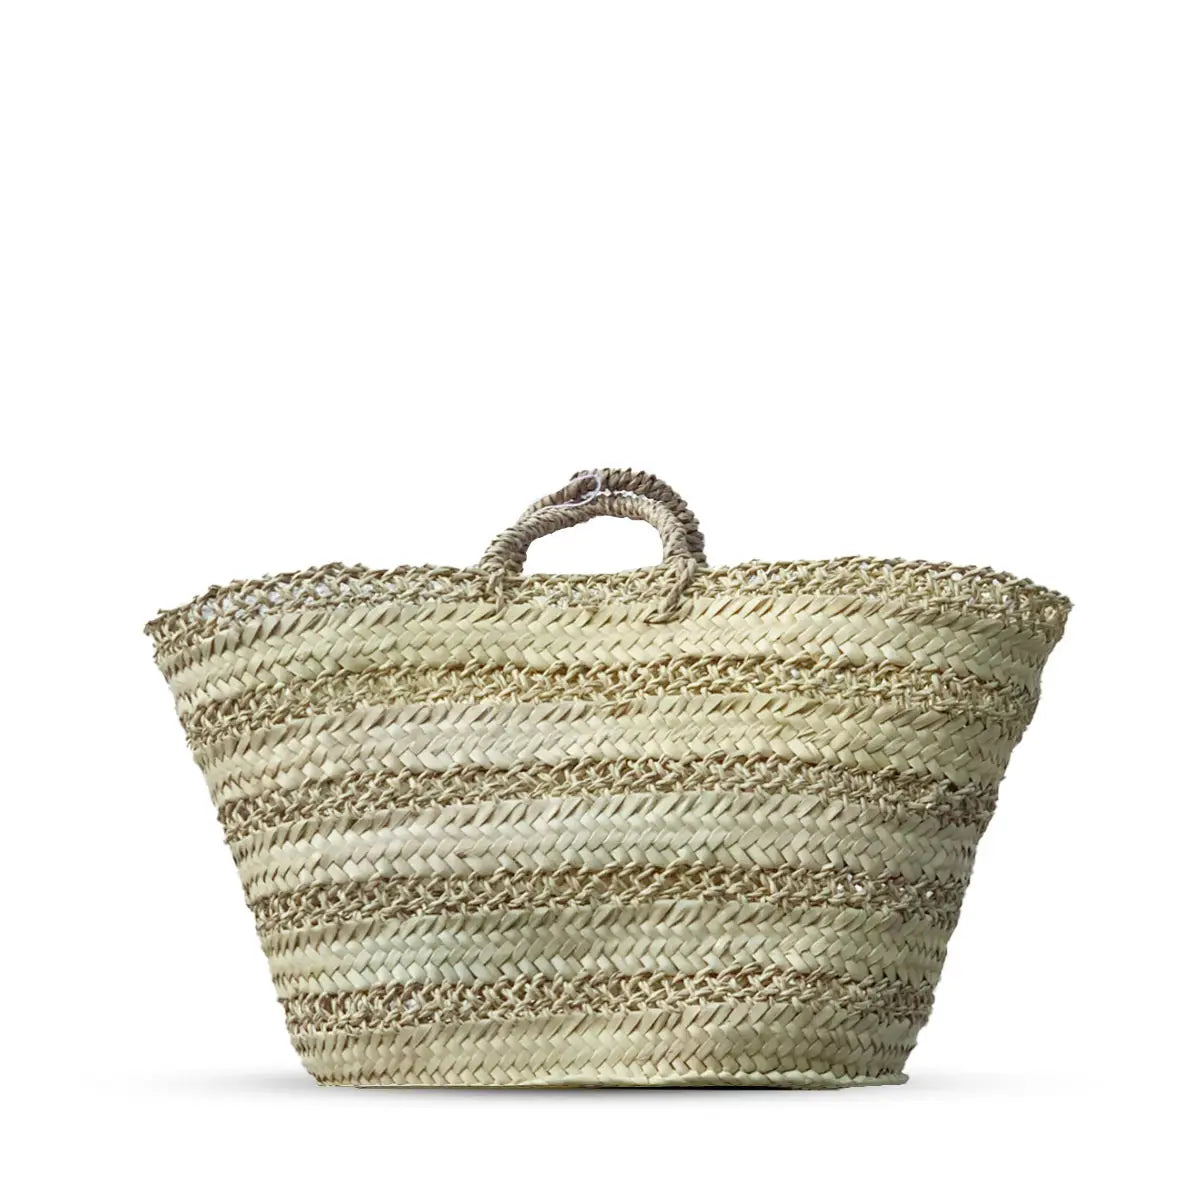 French Market Basket With Stripes